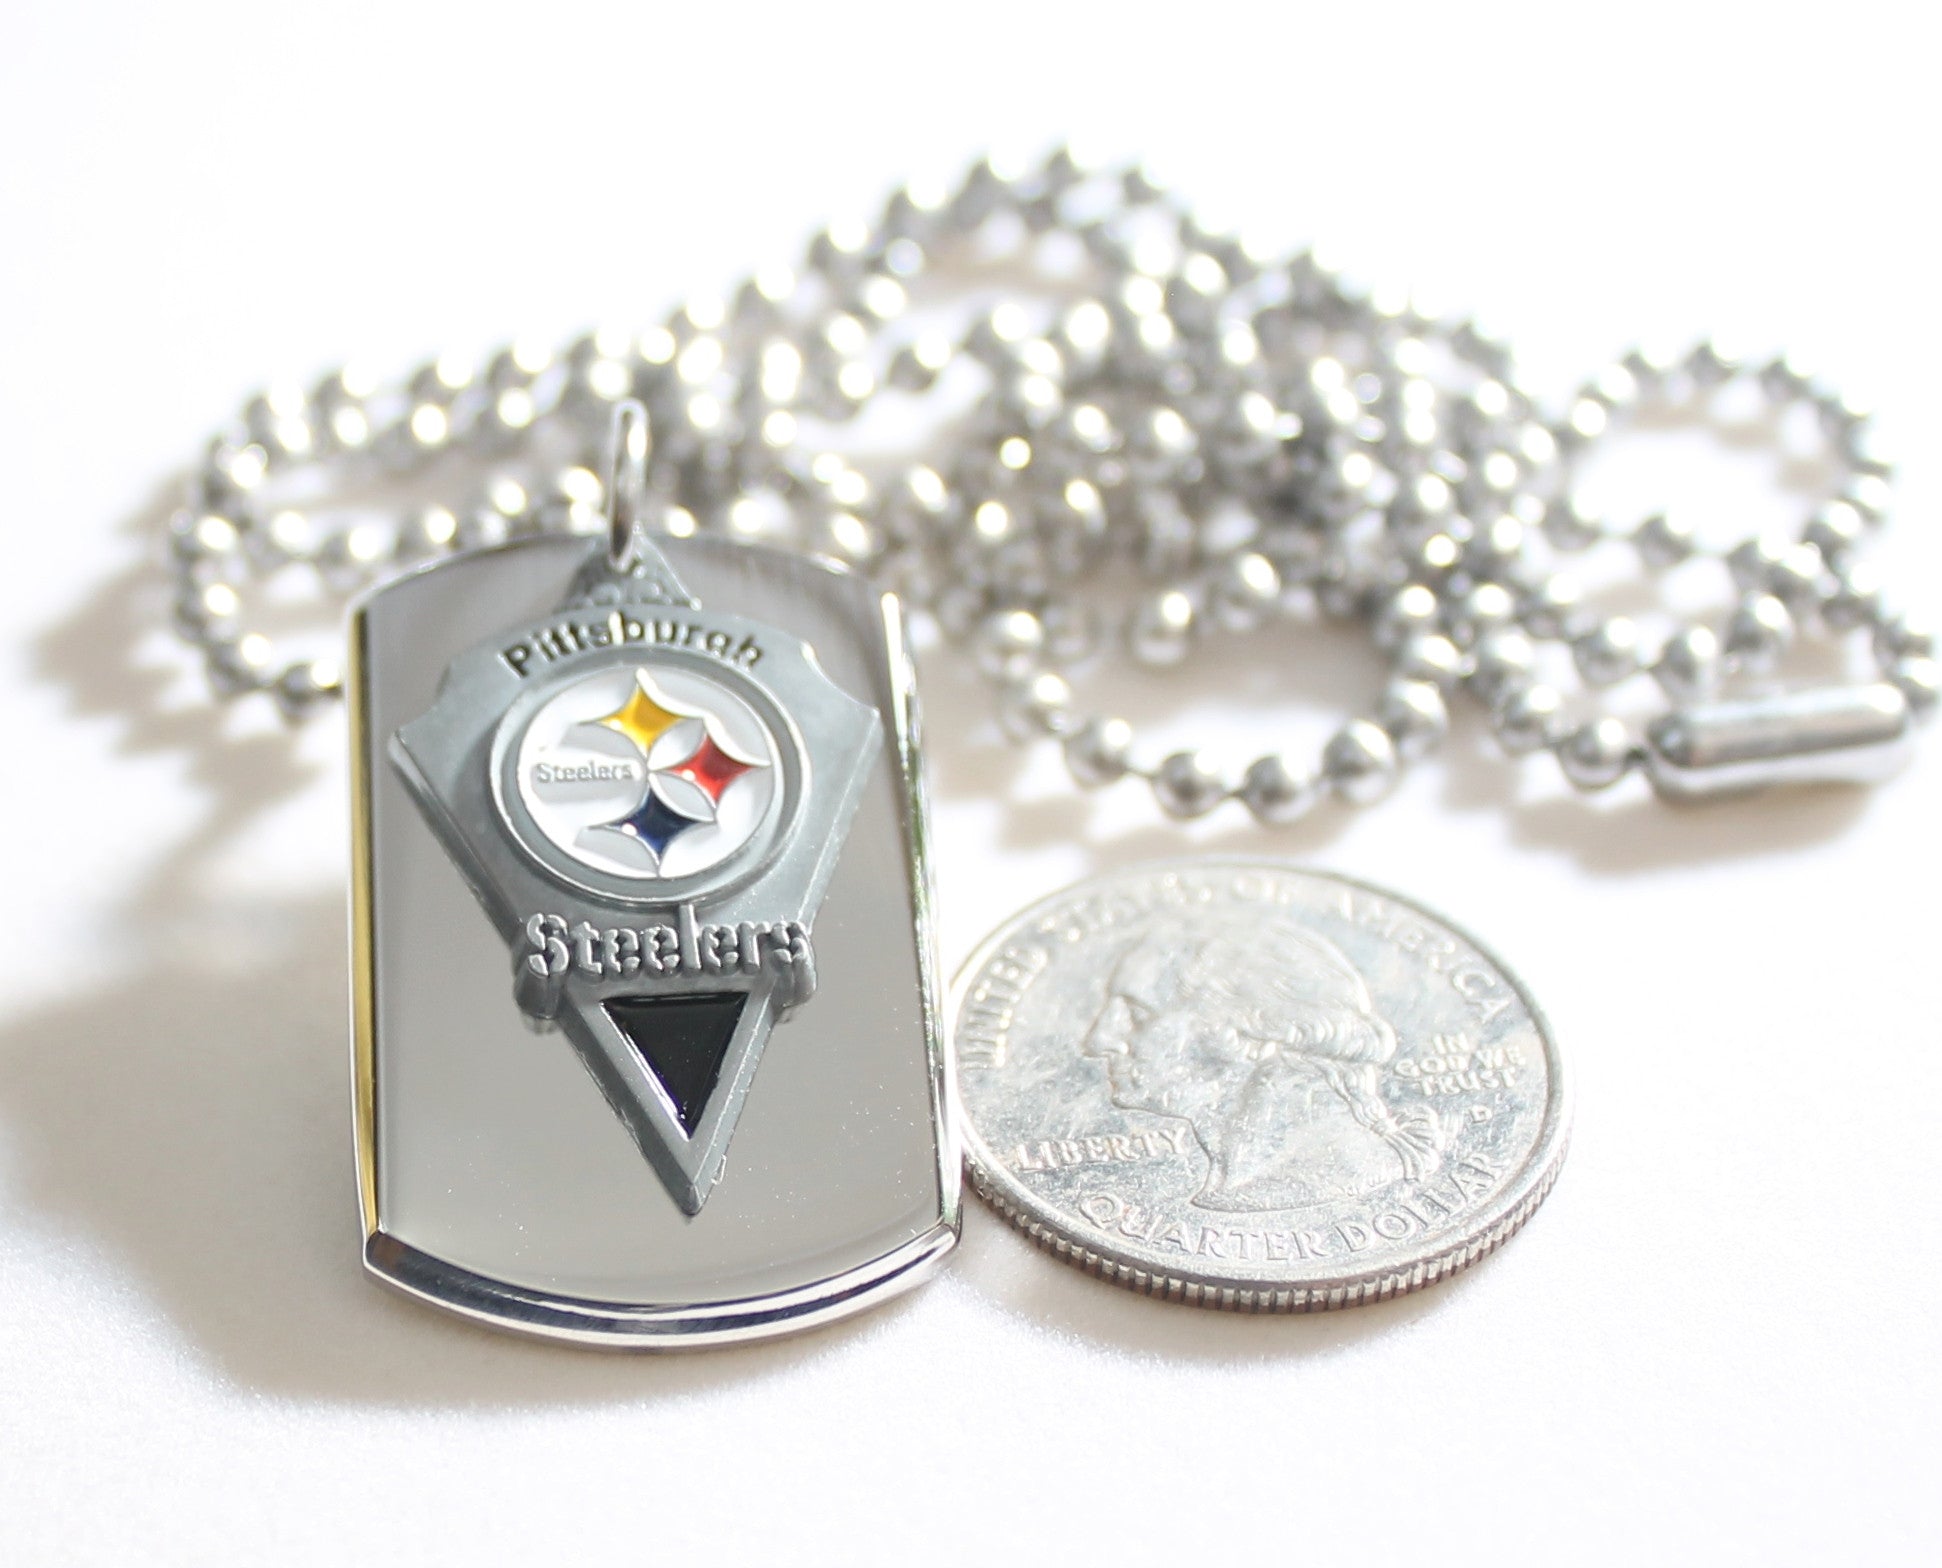 PITTSBURGH STEELERS NFL  STAINLESS STEEL DOG TAG NECKLACE  3D BALL CHAIN - Samstagsandmore